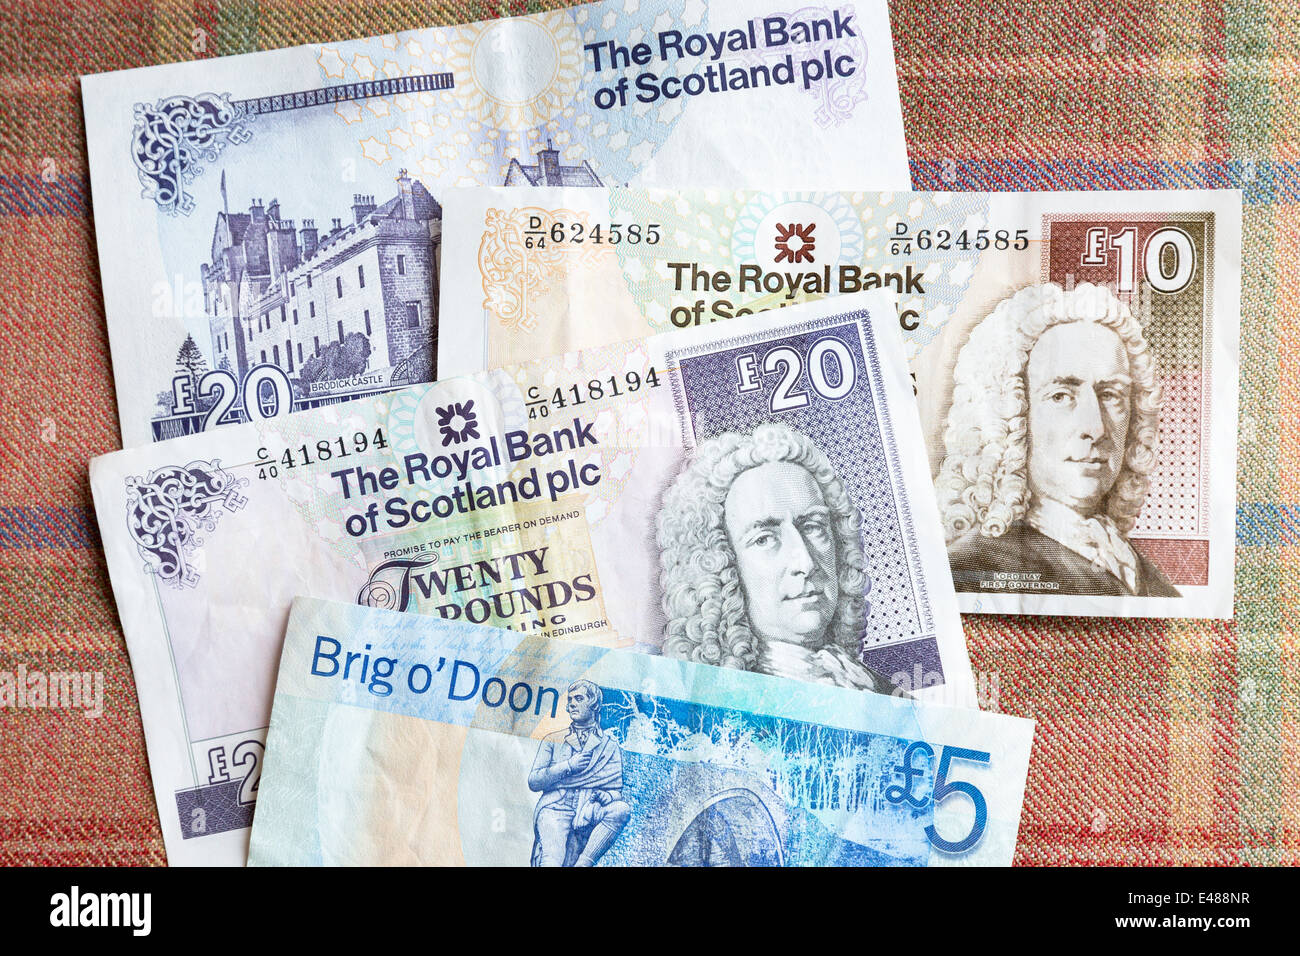 Scottish banknotes from The Royal Bank of SCOTLAND £5, £10 £20 on traditional Scottish tartan background Stock Photo